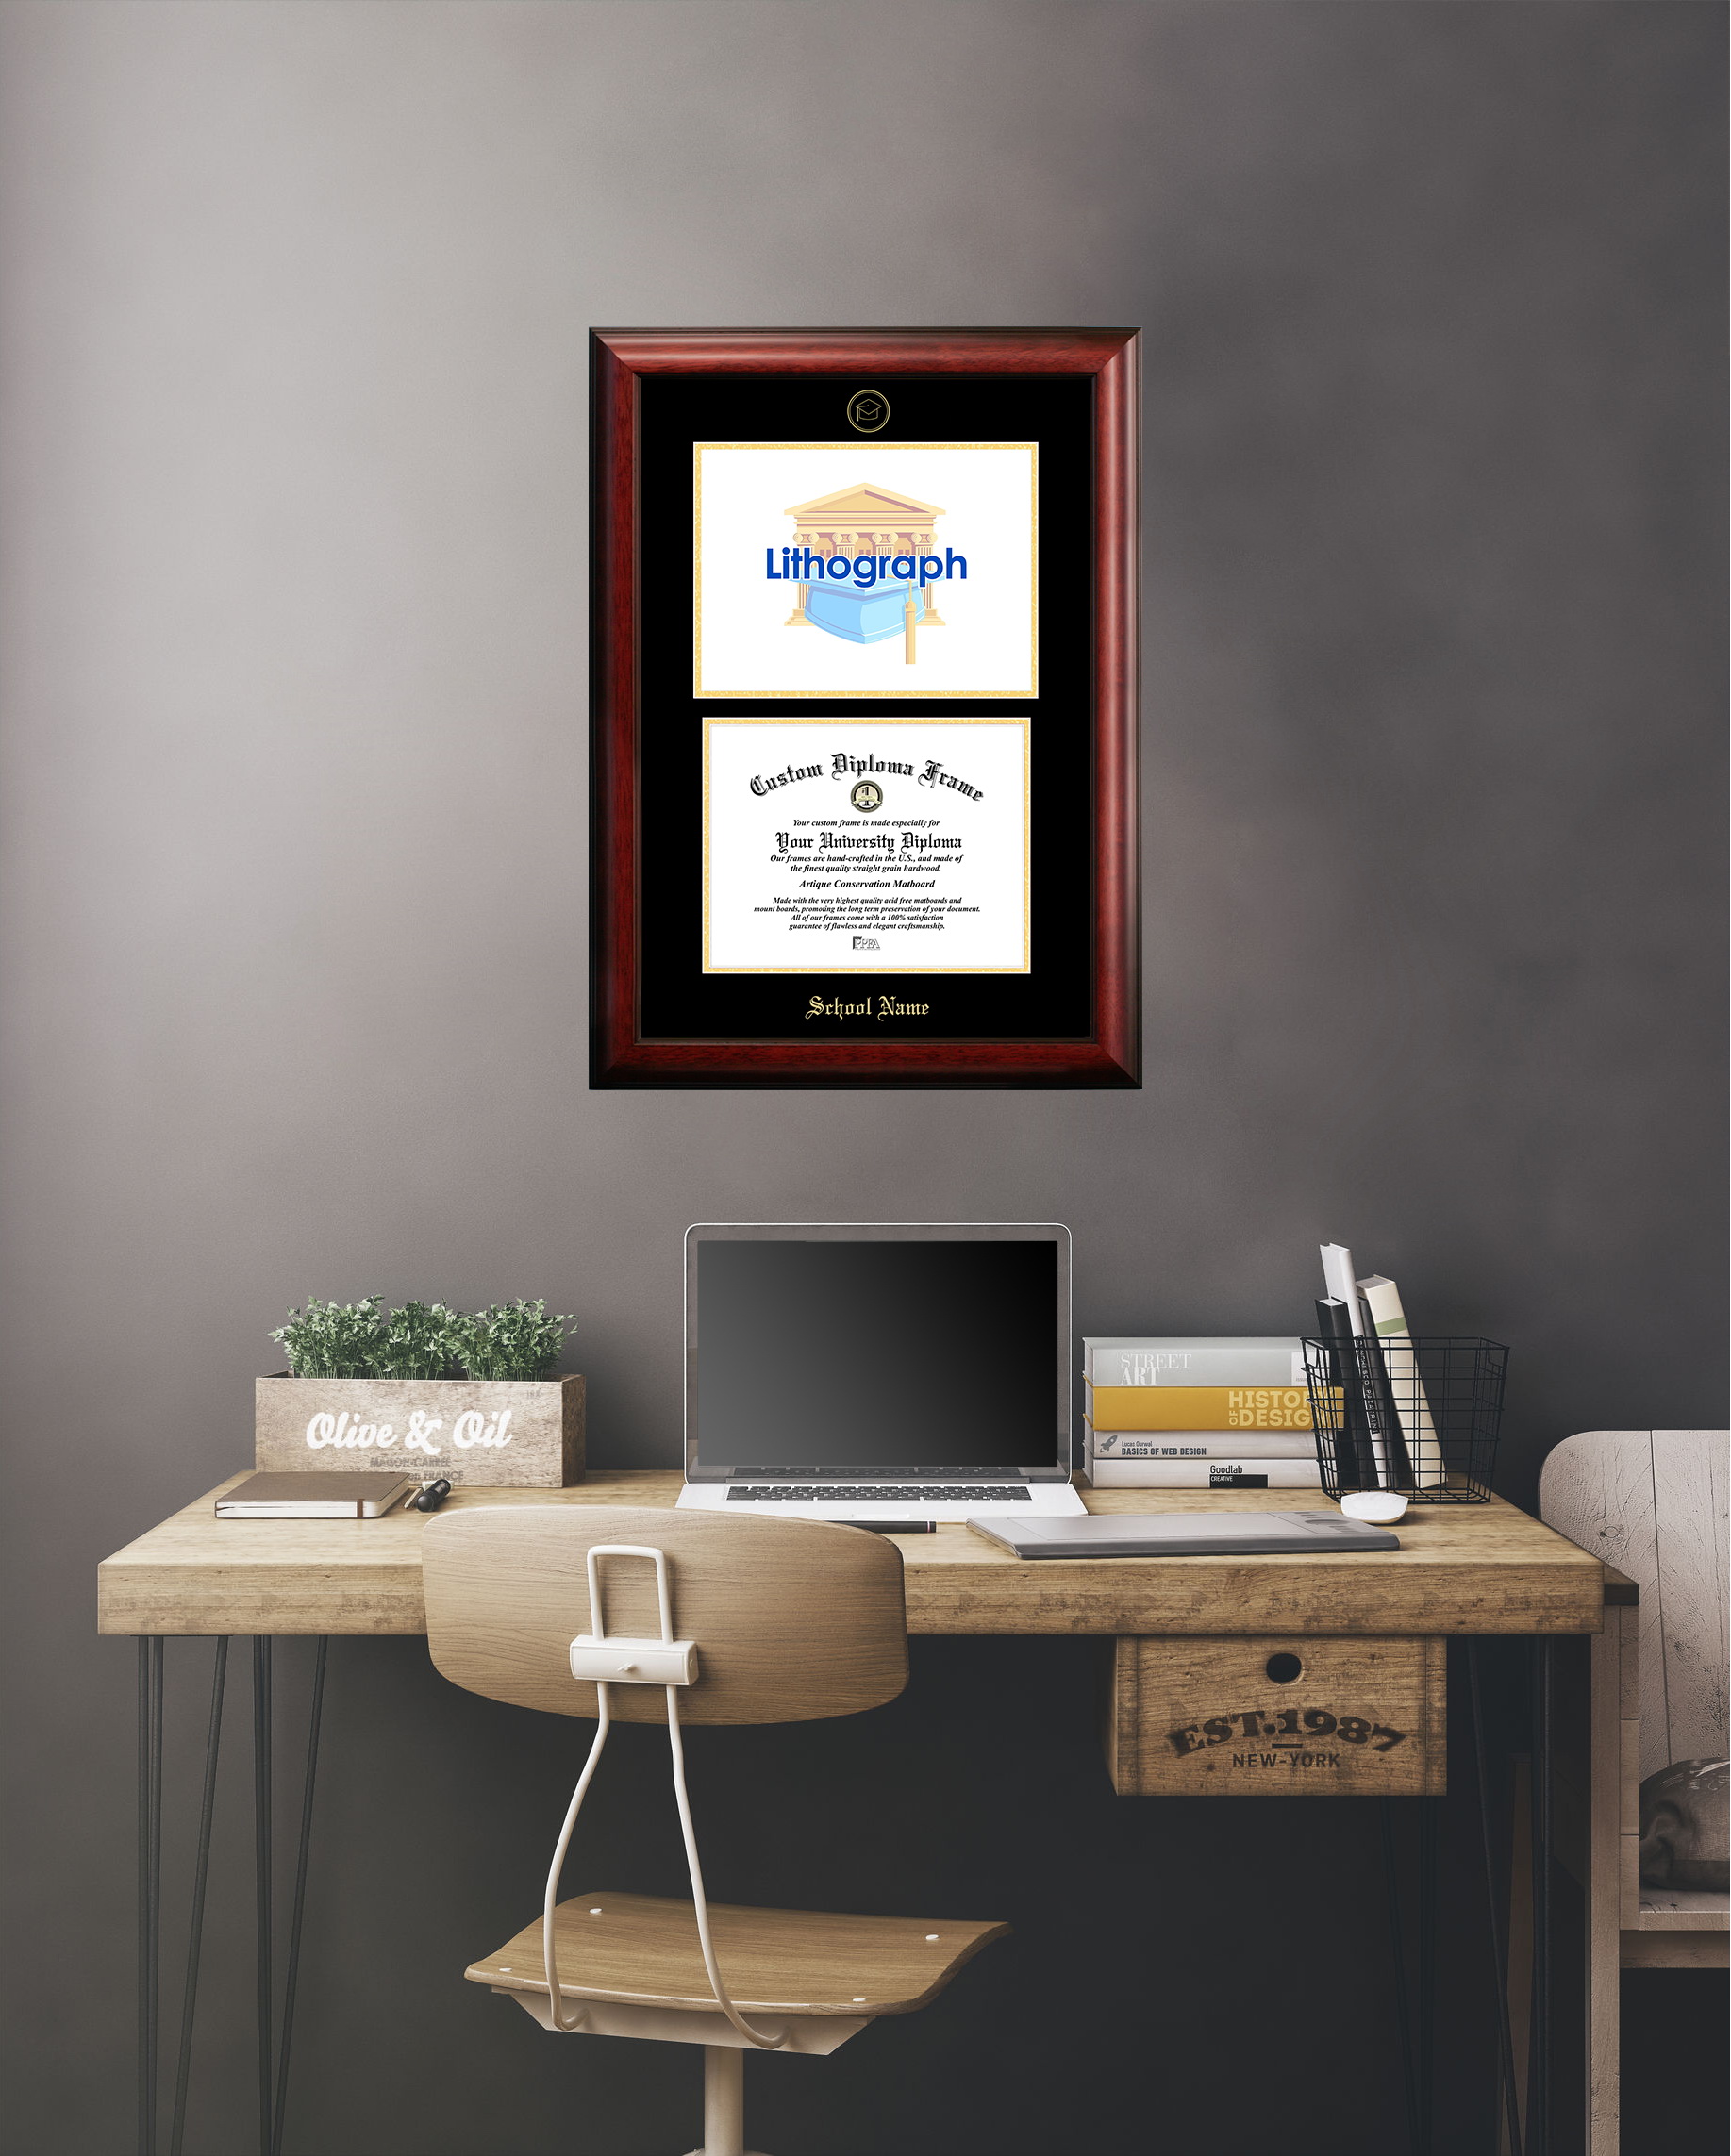 Campus Images CO999LSED-1185 Colorado State University 11w x 8.5h Silver Embossed Diploma Frame with Campus Images Lithograph